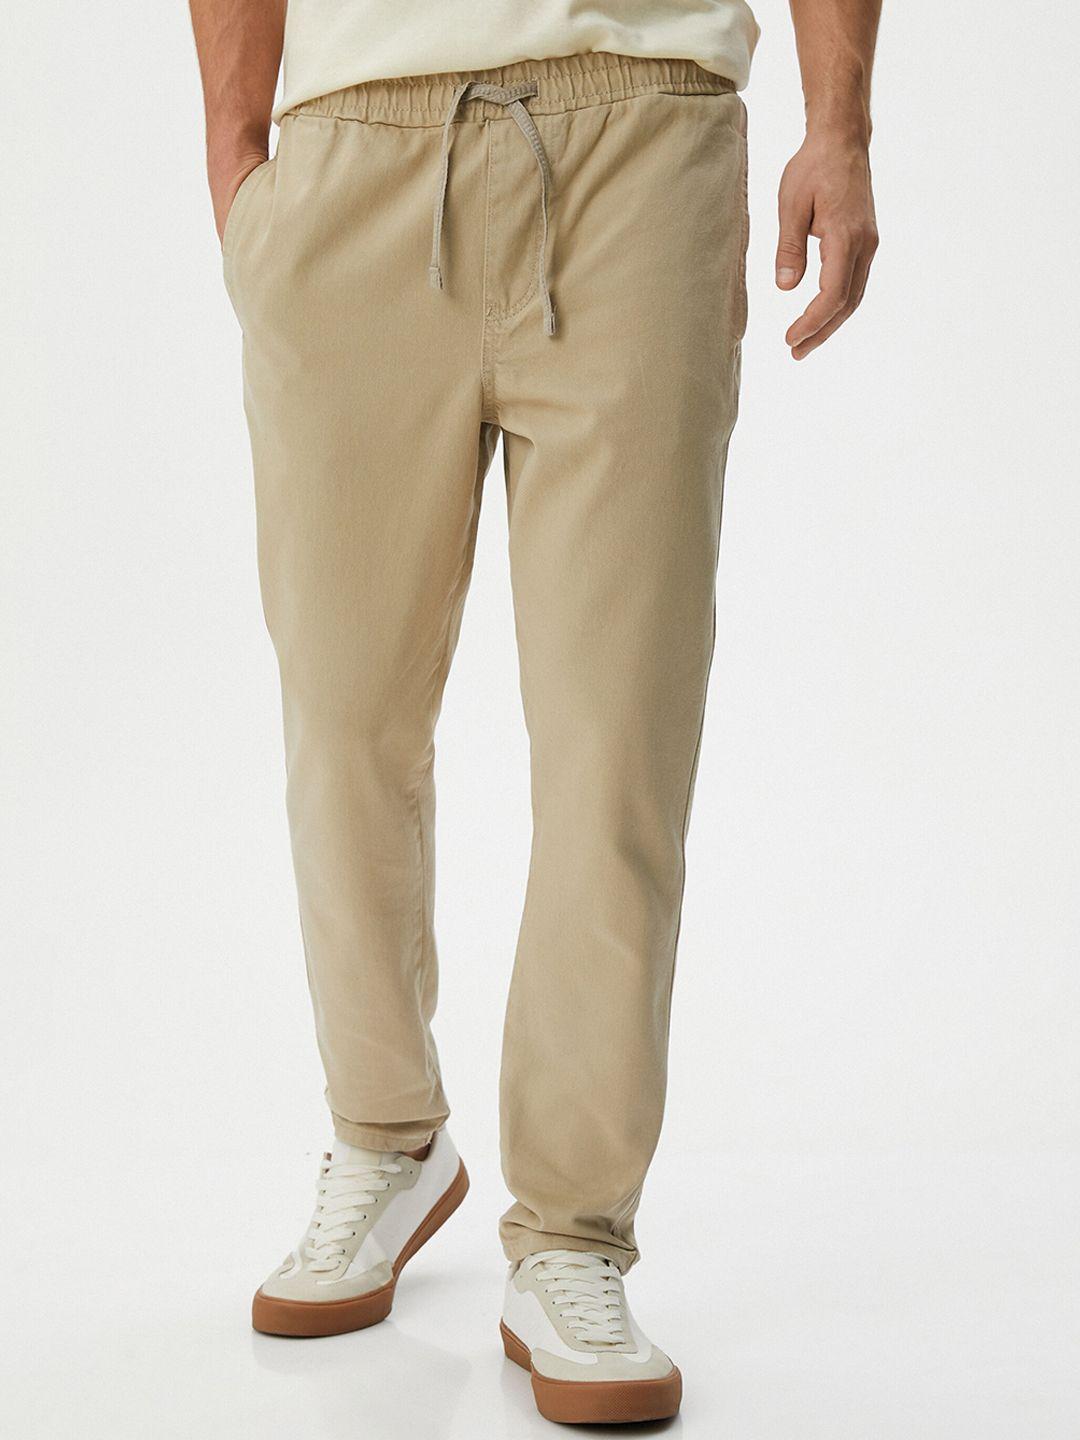 koton men mid rise pure cotton chinos trousers